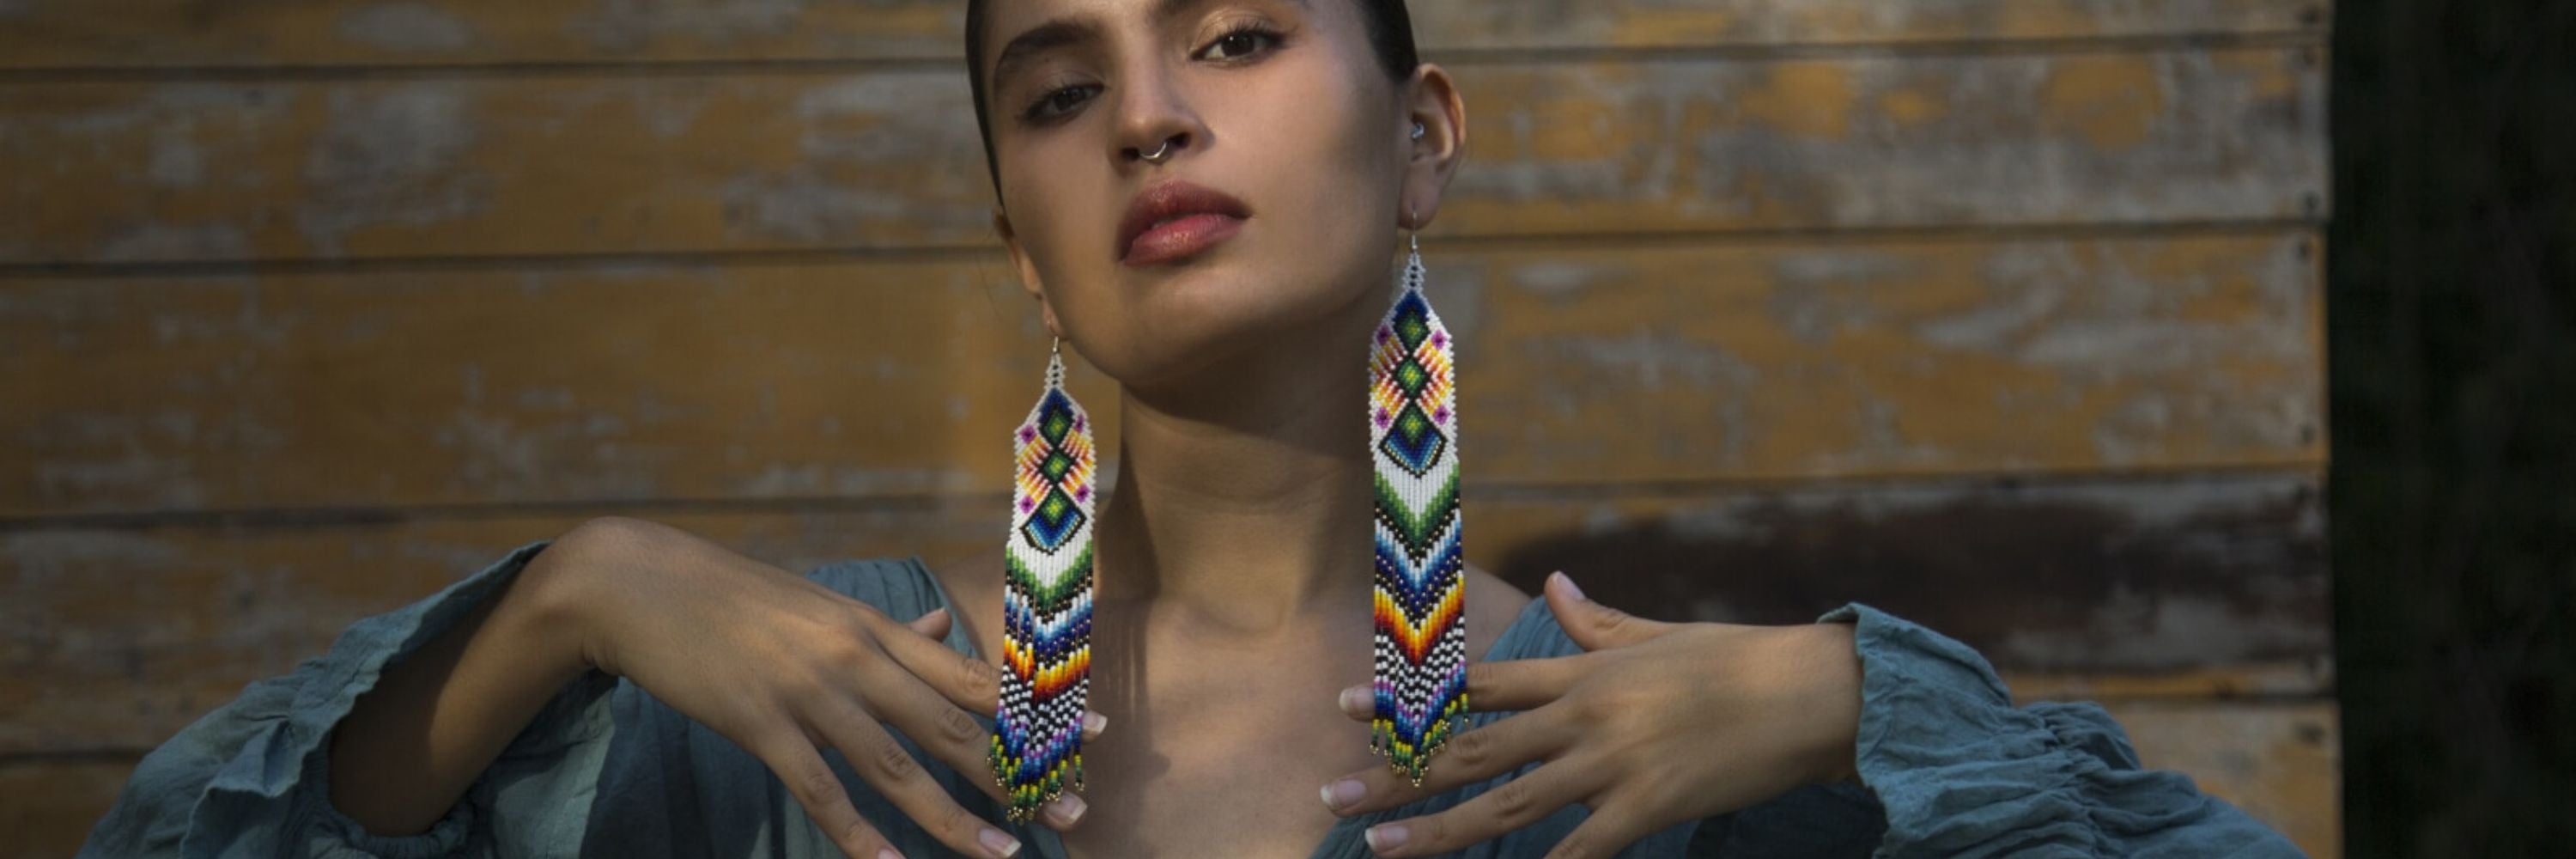 High-quality Handcrafted beaded earrings by Mother Sierra